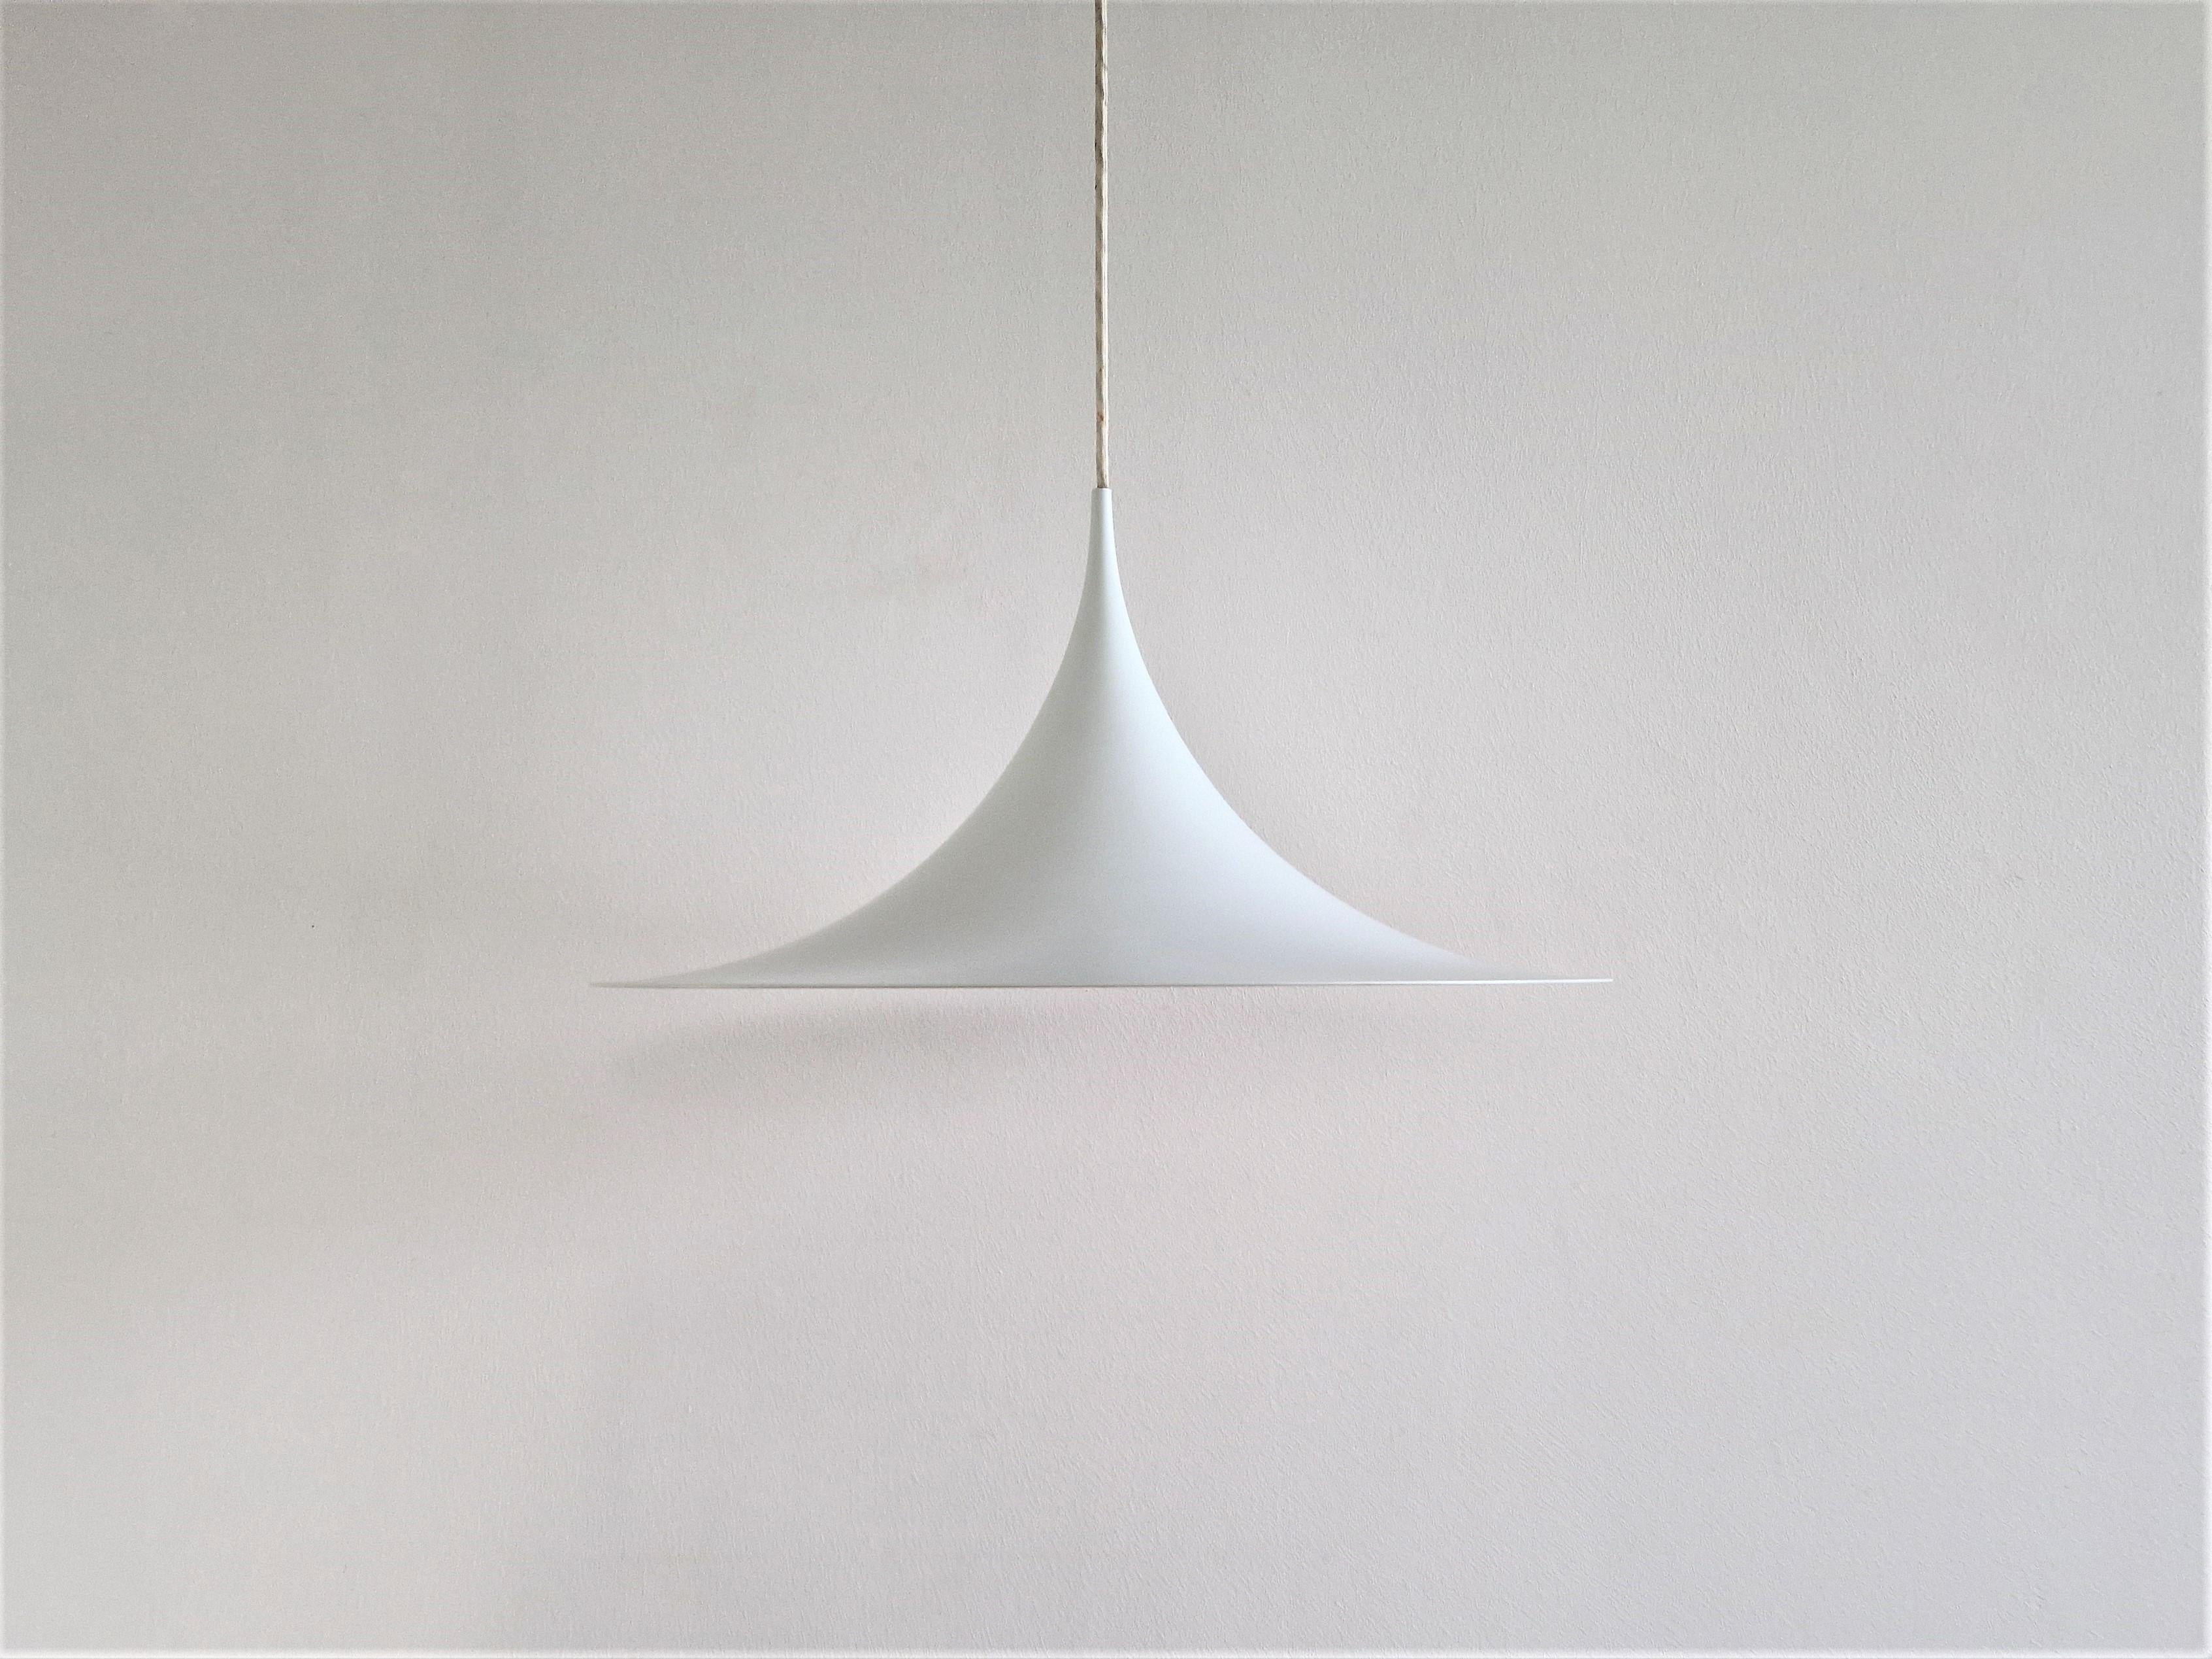 This famous model 'Semi' or 'witch hat' pendant lamp was designed by Claus Bonderup and Torsten Thorup for Fog & Mørup in 1968.  An iconic pendant that is a true example of a timeless design. This piece is in white lacquered metal with a diameter of